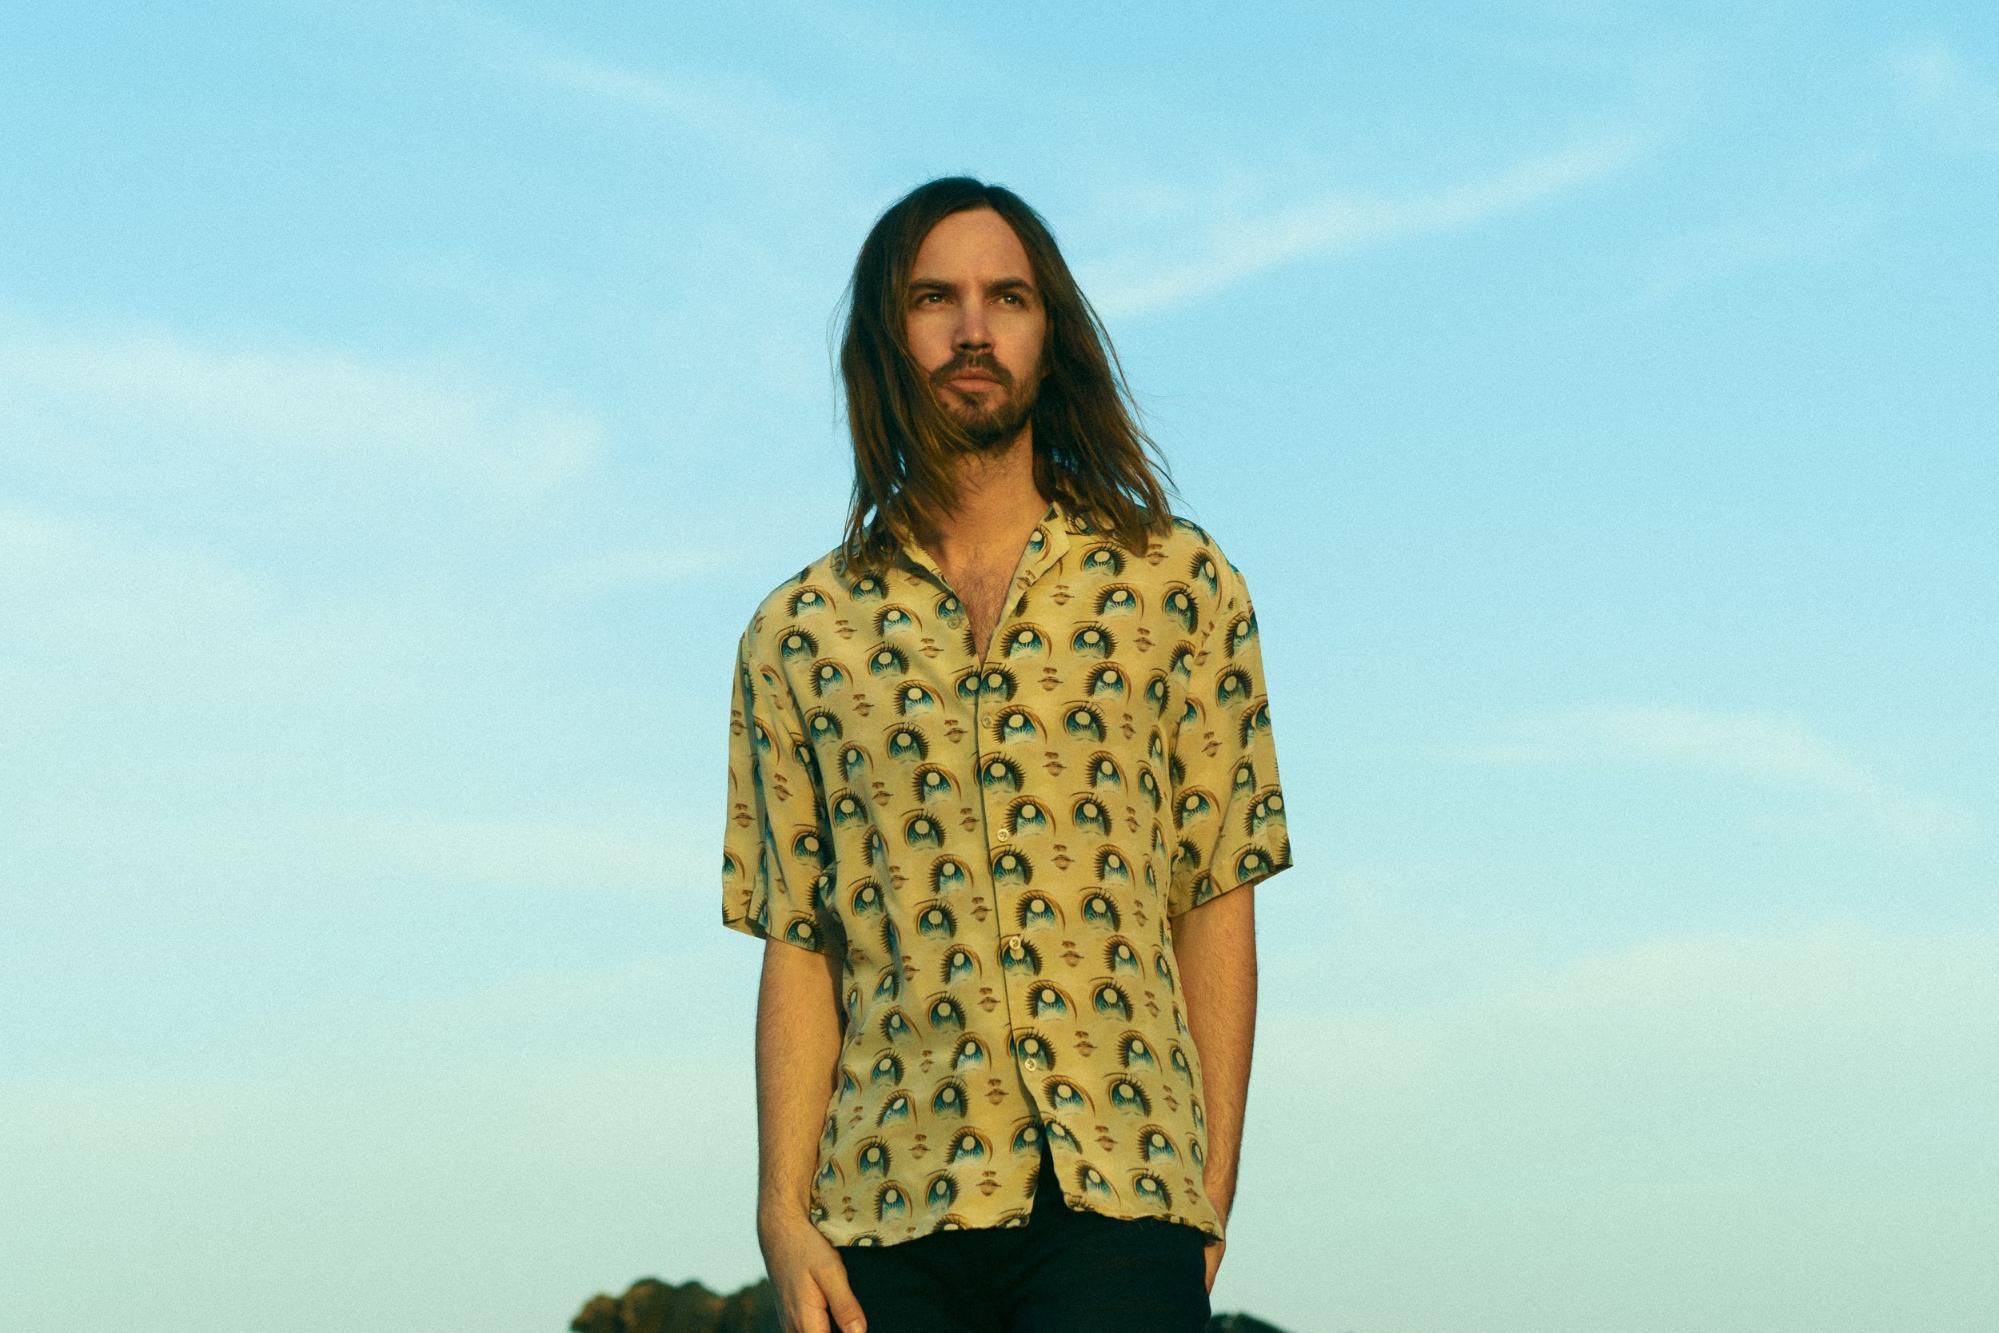 Tame Impala: Filling the Void